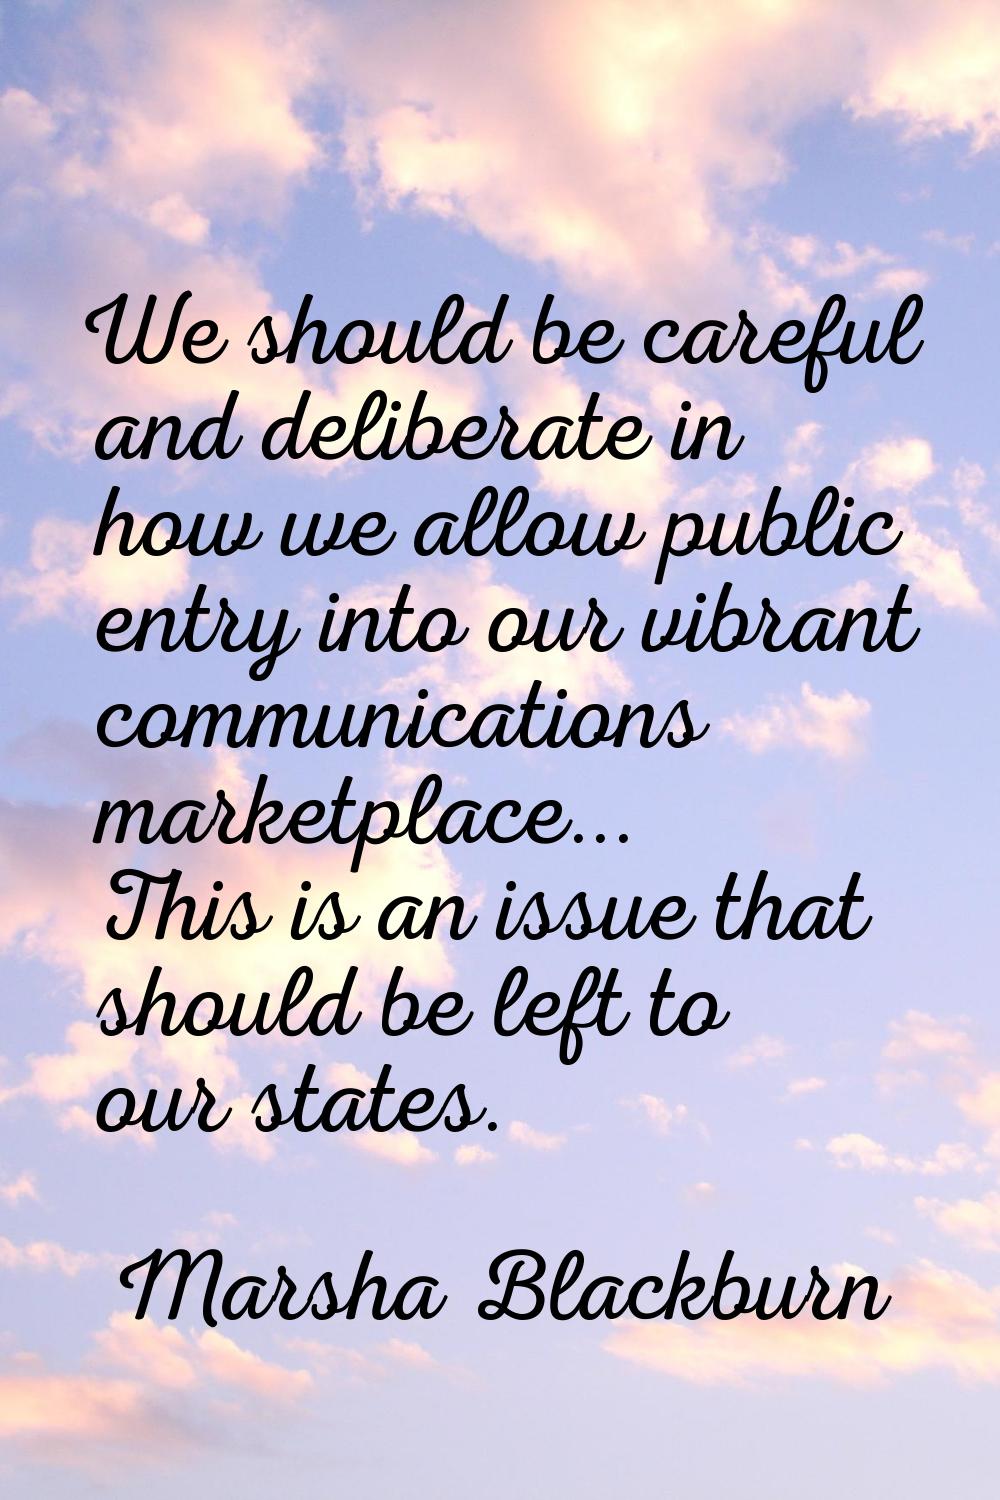 We should be careful and deliberate in how we allow public entry into our vibrant communications ma